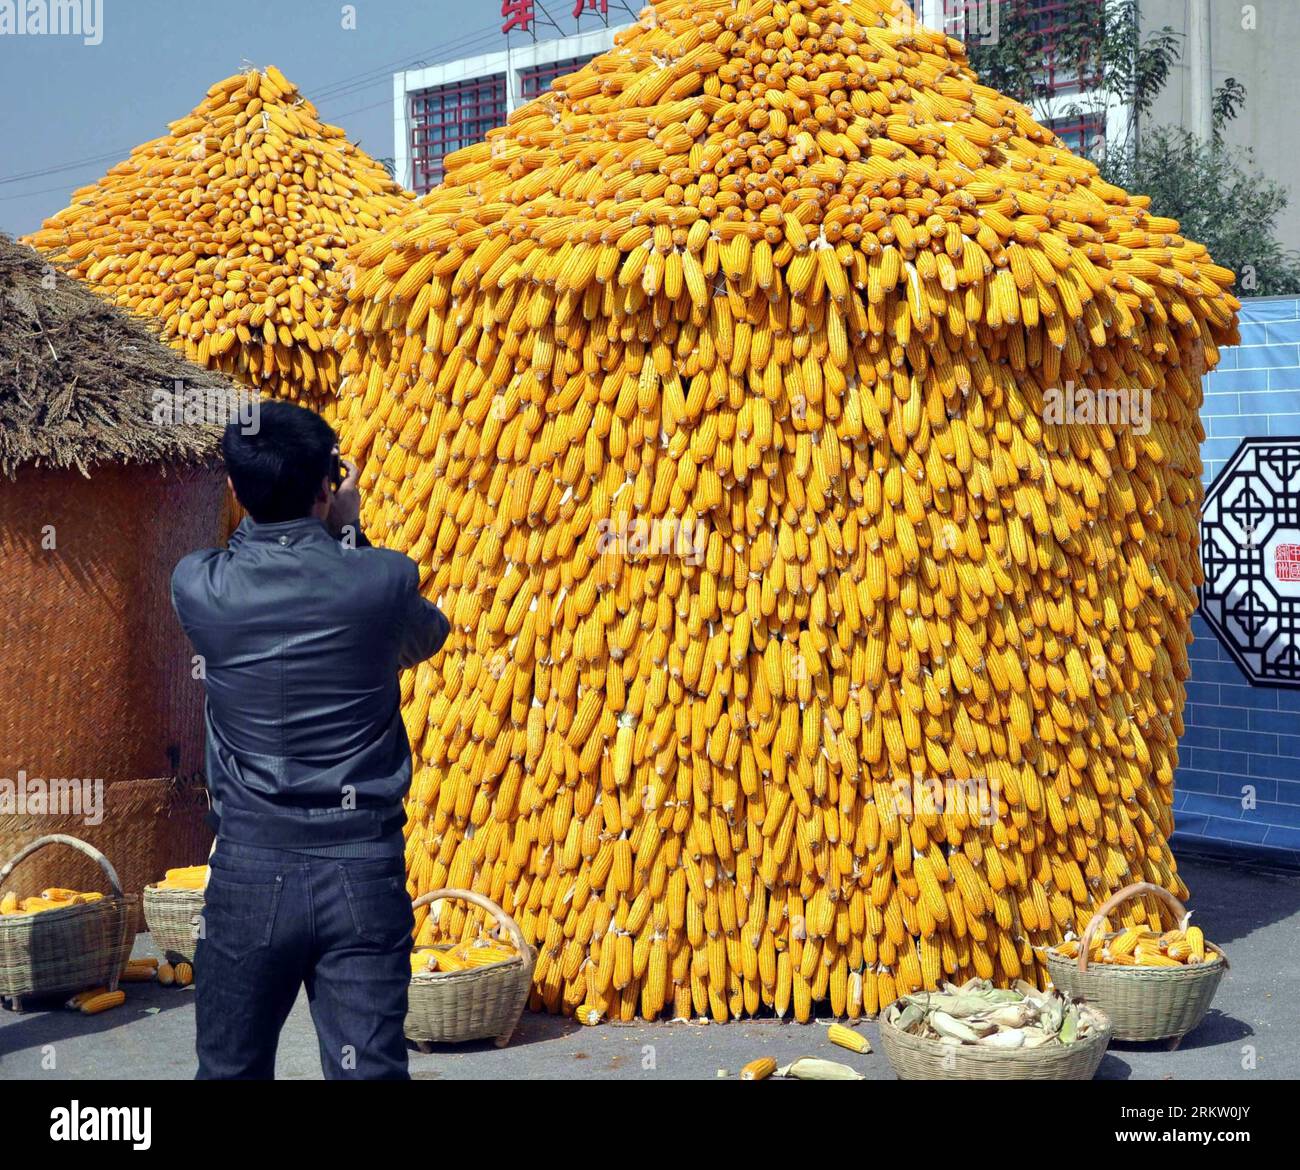 Bildnummer: 58582306  Datum: 12.10.2012  Copyright: imago/Xinhua (121012) -- XINJIANG, Oct. 12, 2012 (Xinhua) -- A visitor takes photo of a shed piled up by corns during an exhibition of agricultural production in Xinjiang County, north China s Shanxi Province. Oct. 12, 2012. Xinjiang County has embraced a good harvest this year. (Xinhua/Wang Feihang) (mp) CHINA-SHANXI-XINJIANG-HARVEST (CN) PUBLICATIONxNOTxINxCHN Wirtschaft Messe Landwirtschaft Agrarmesse Landwirtschaftsmesse kurios x0x xmb 2012 quadrat      58582306 Date 12 10 2012 Copyright Imago XINHUA  Xinjiang OCT 12 2012 XINHUA a Visitor Stock Photo